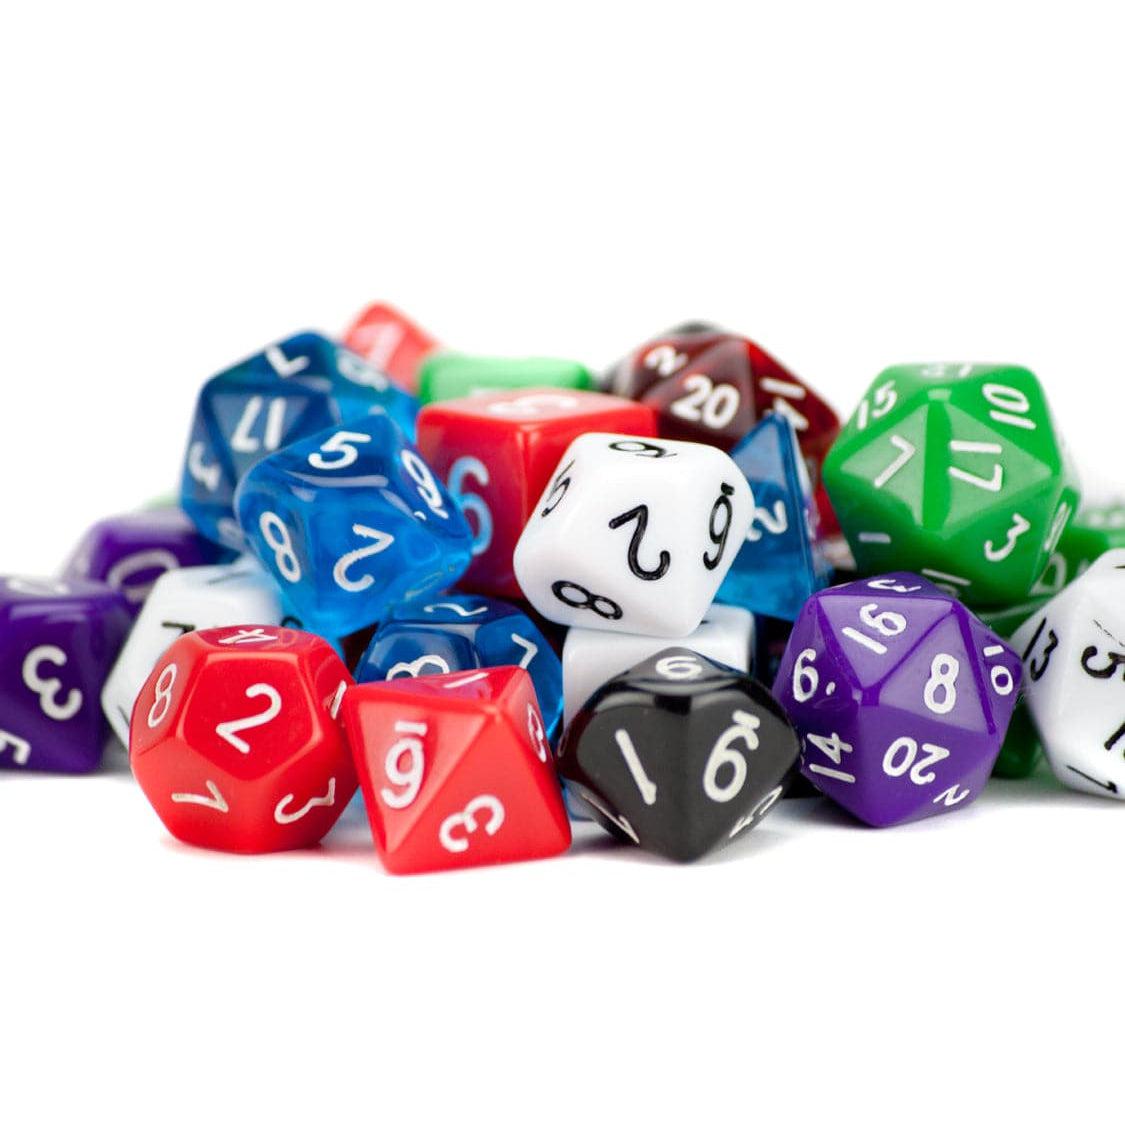 Legacy Dice-100+ Pack of Random D12 Polyhedral Dice in Multiple Color-GDN4005-Legacy Toys